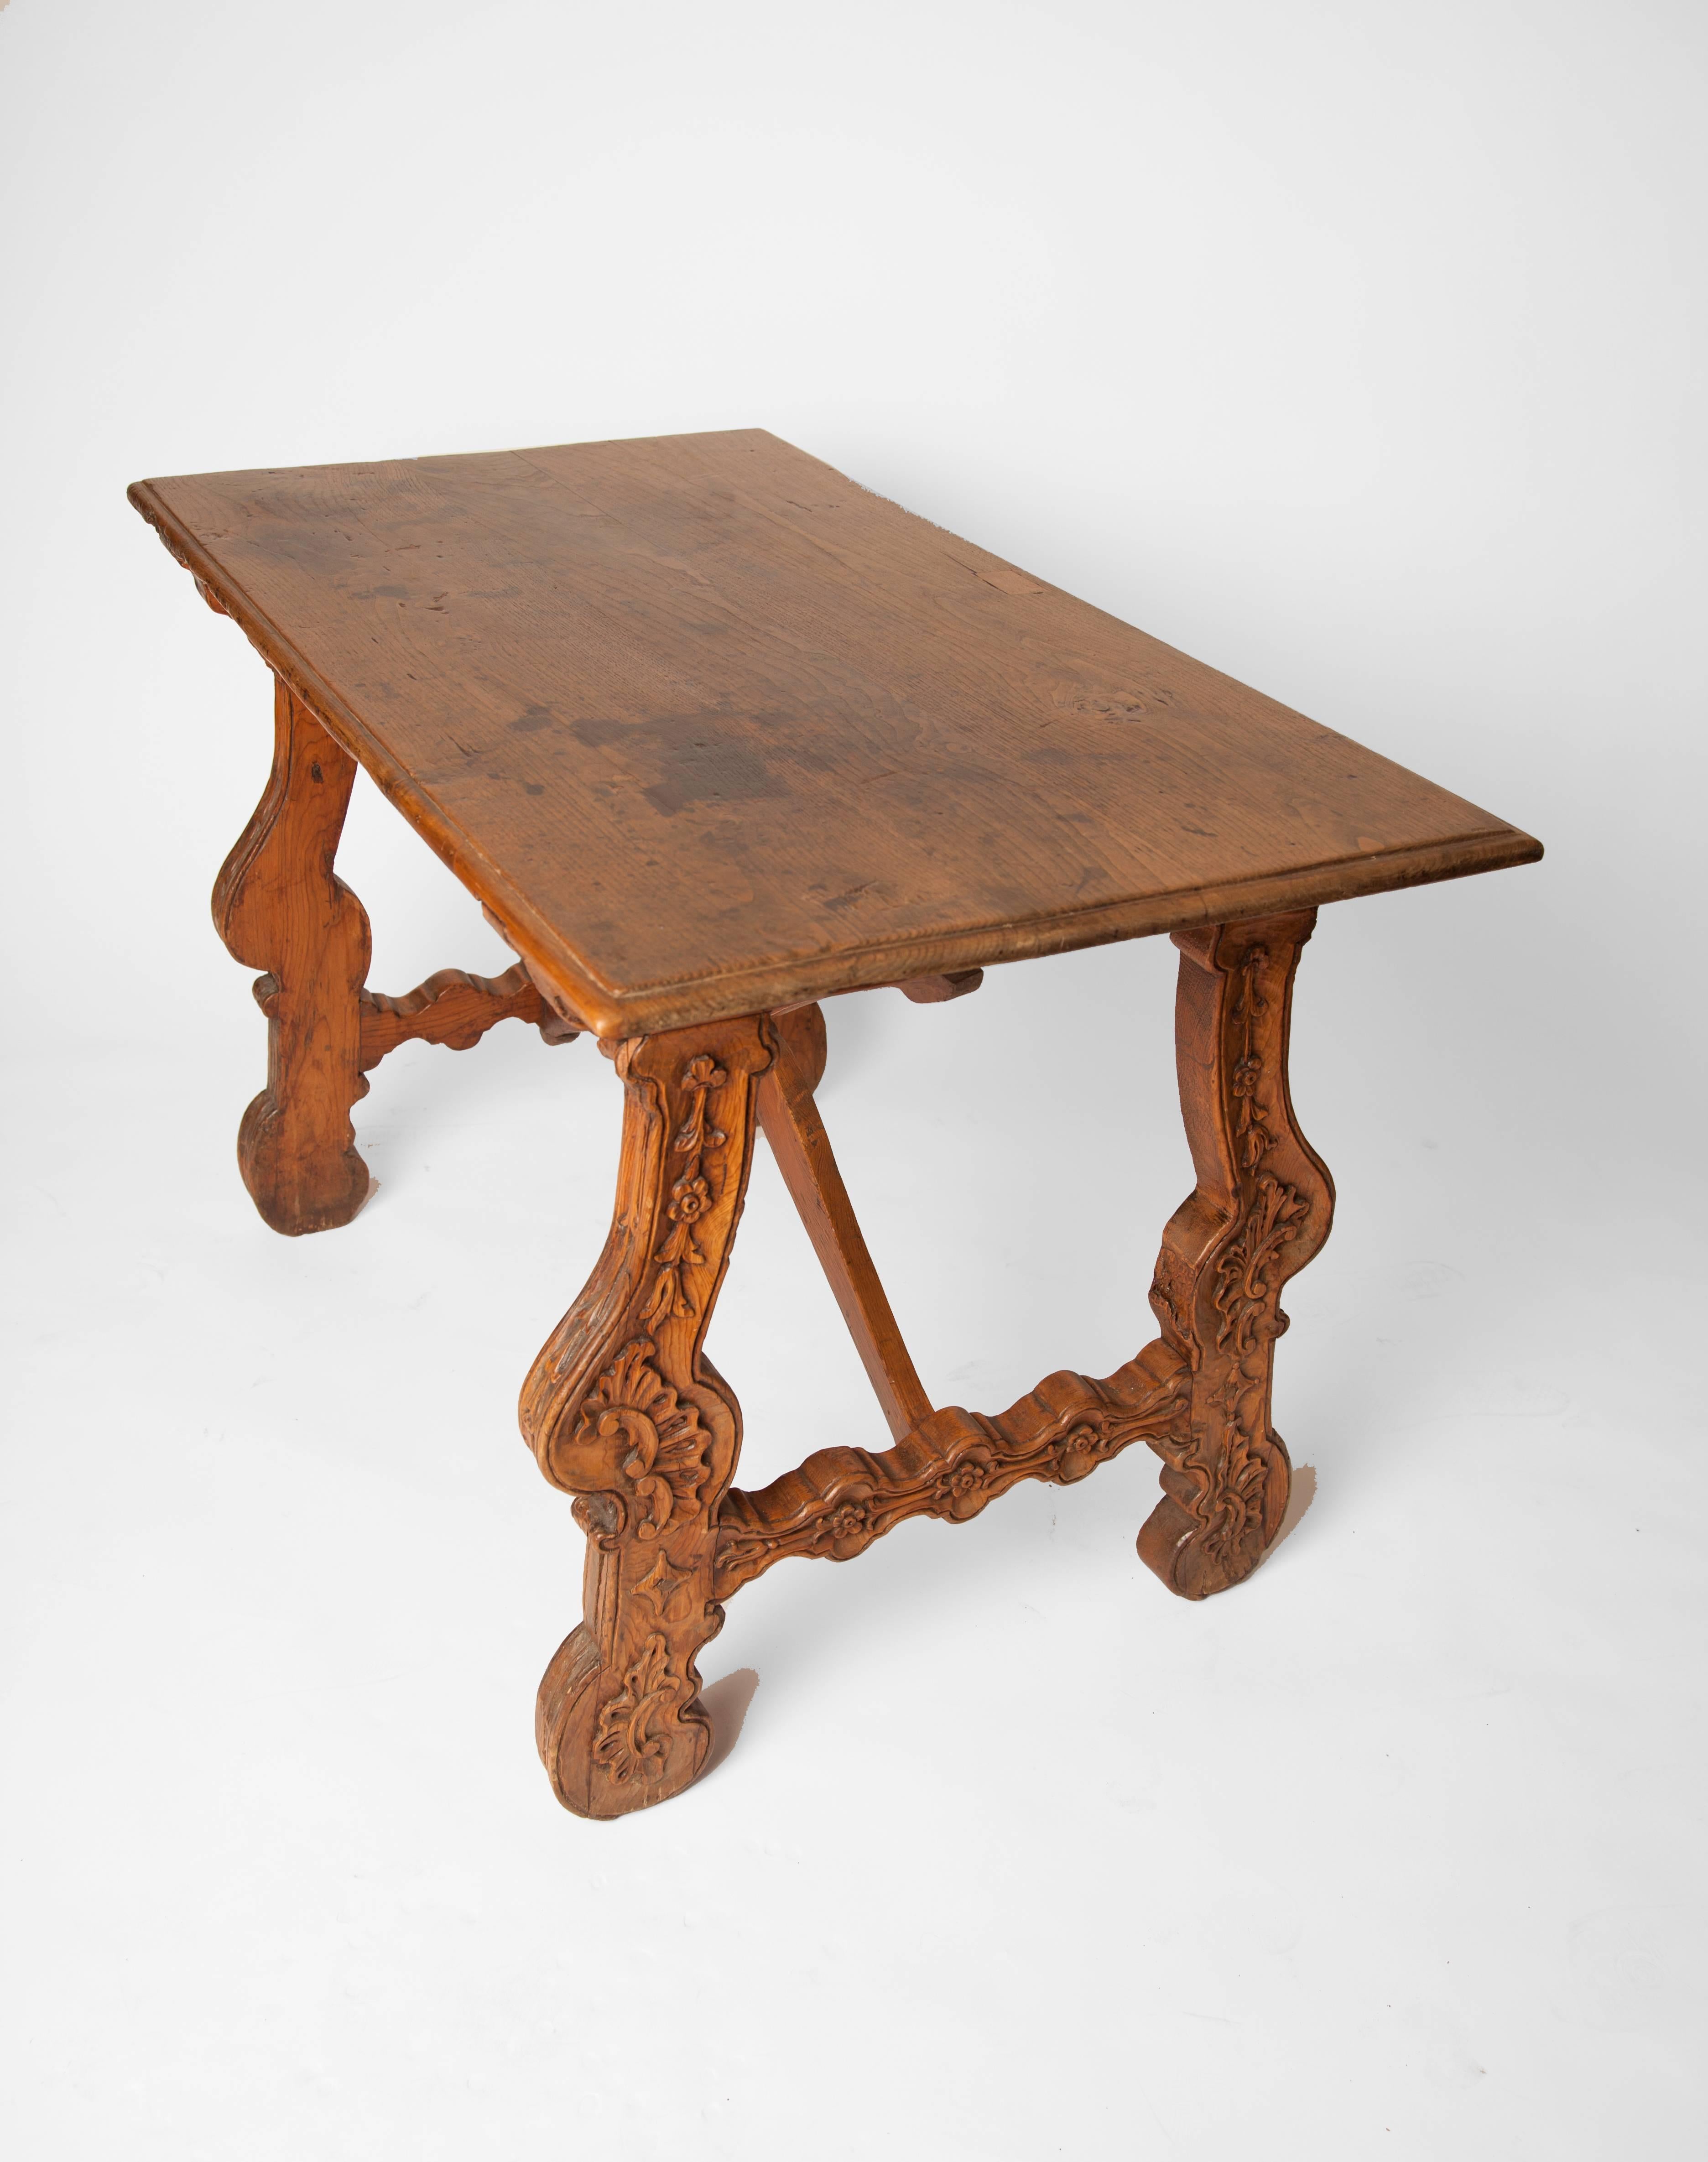 19th century Spanish walnut table with carved floral detailed legs.